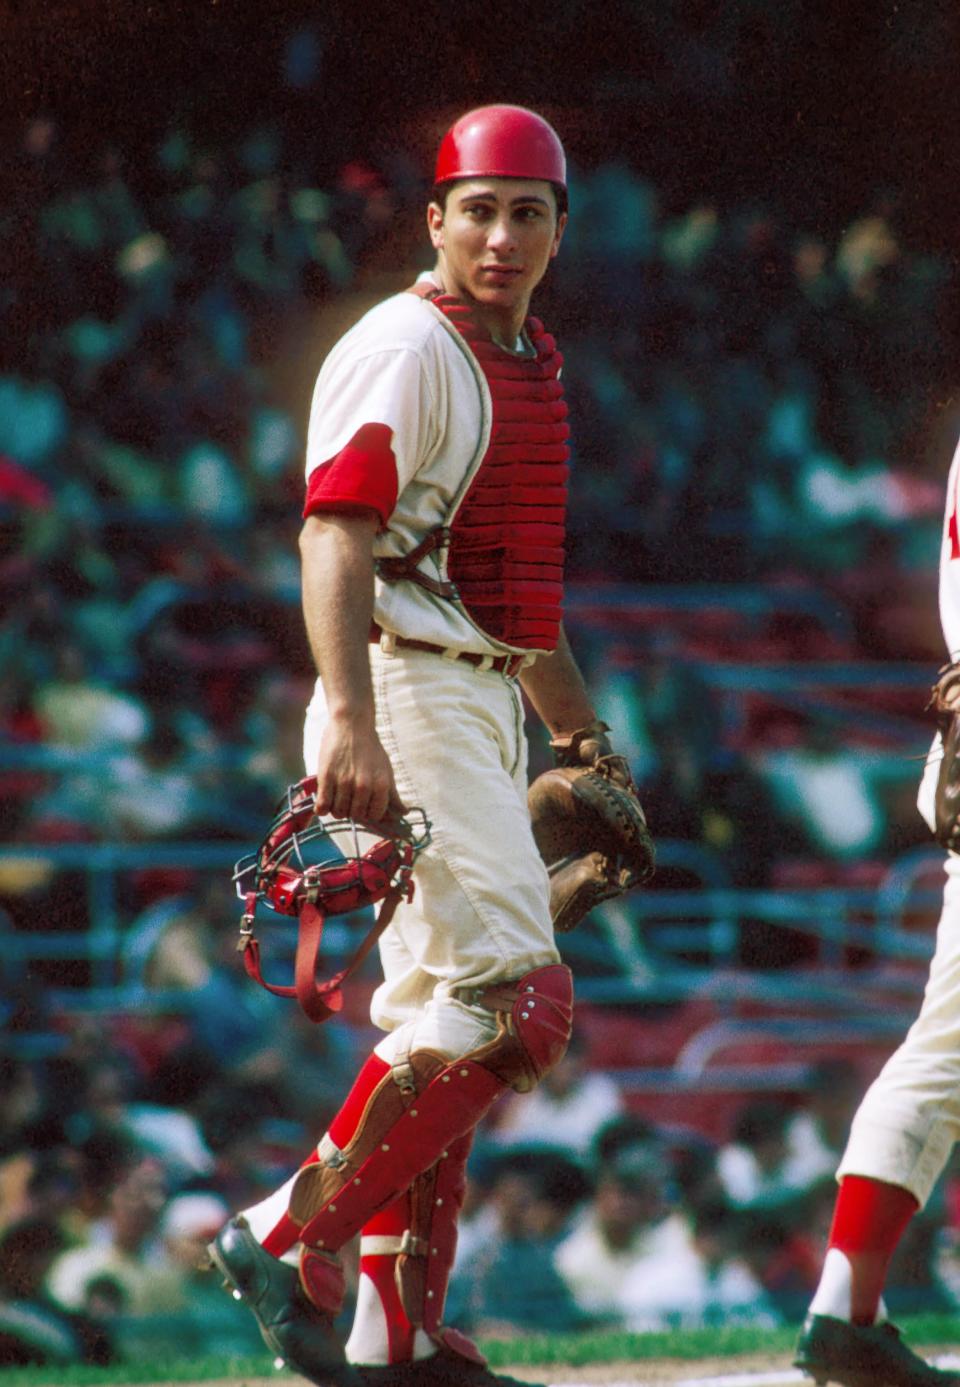 Hall of Fame catcher Johnny Bench was the youngest All-Star in Reds history at the time in 1969.